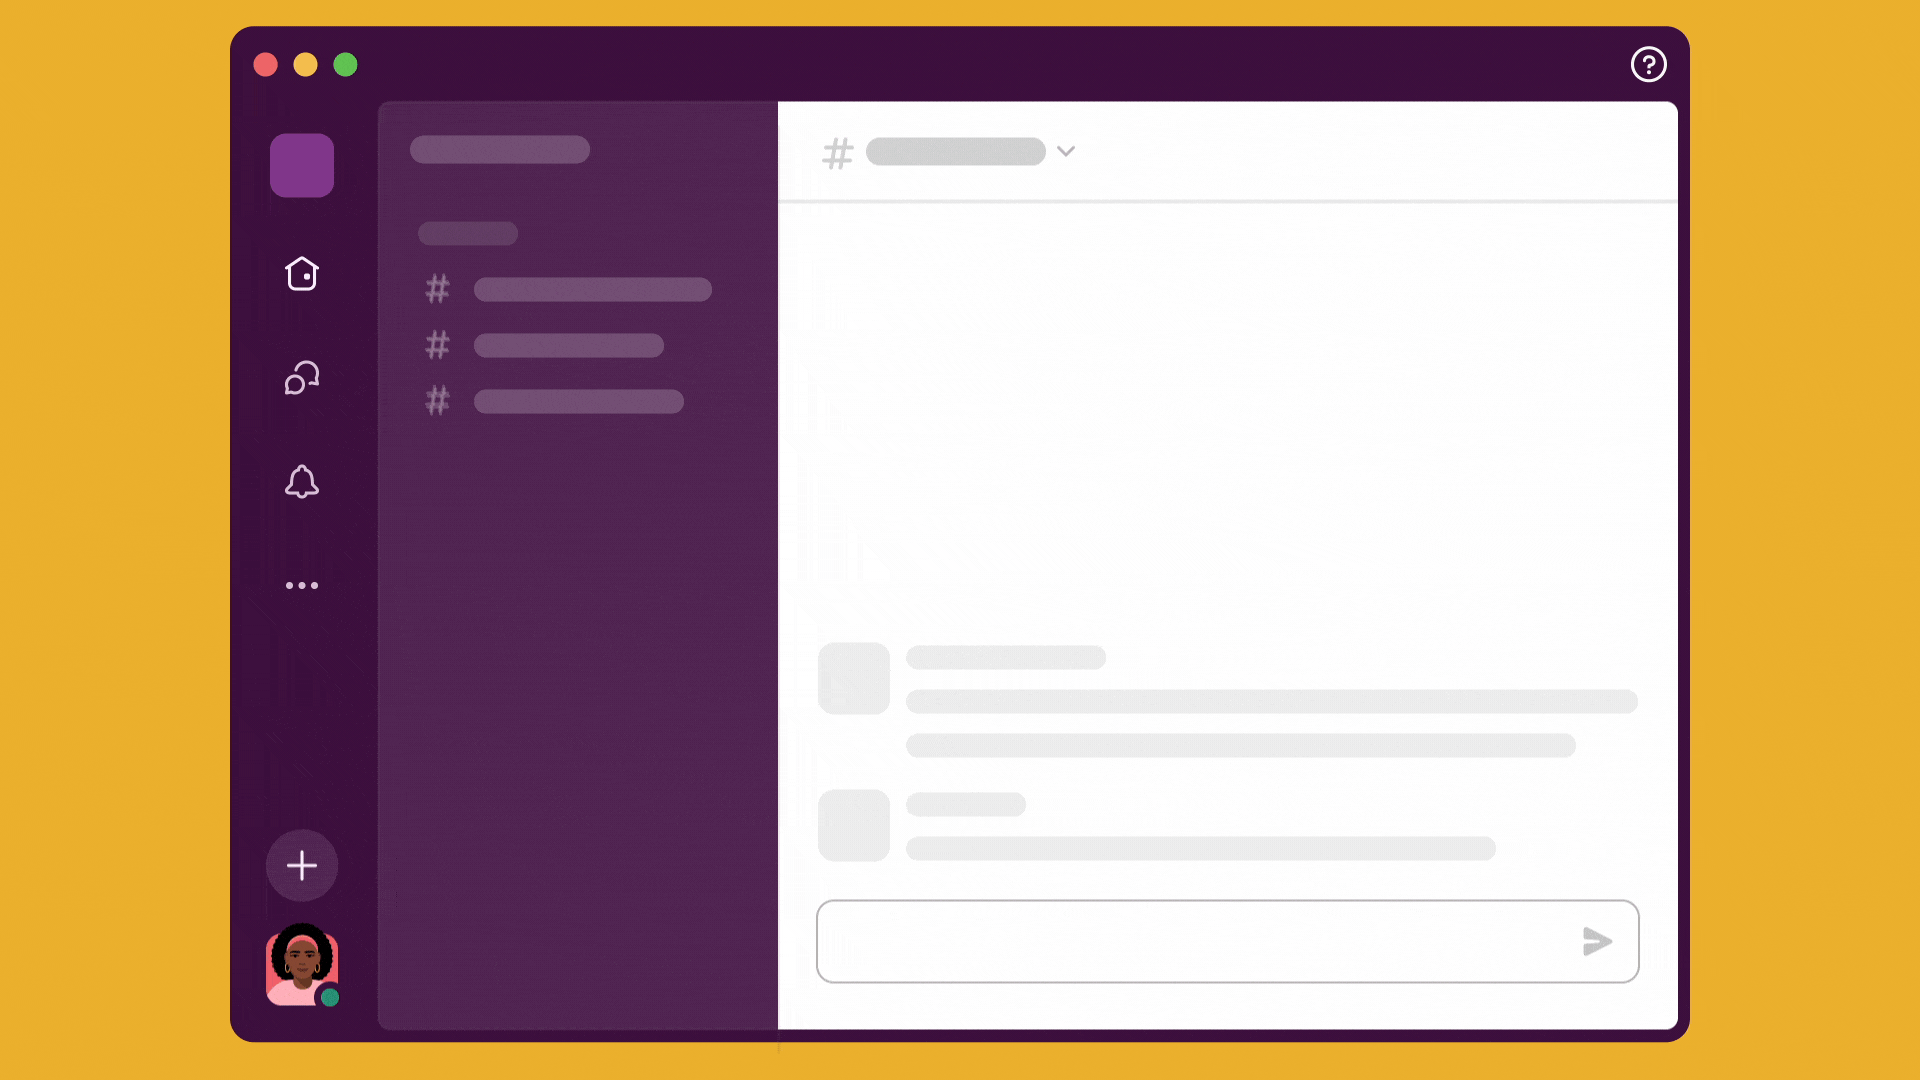 Navigating the Slack interface to create a canvas, add content to it and then share the canvas in a channel